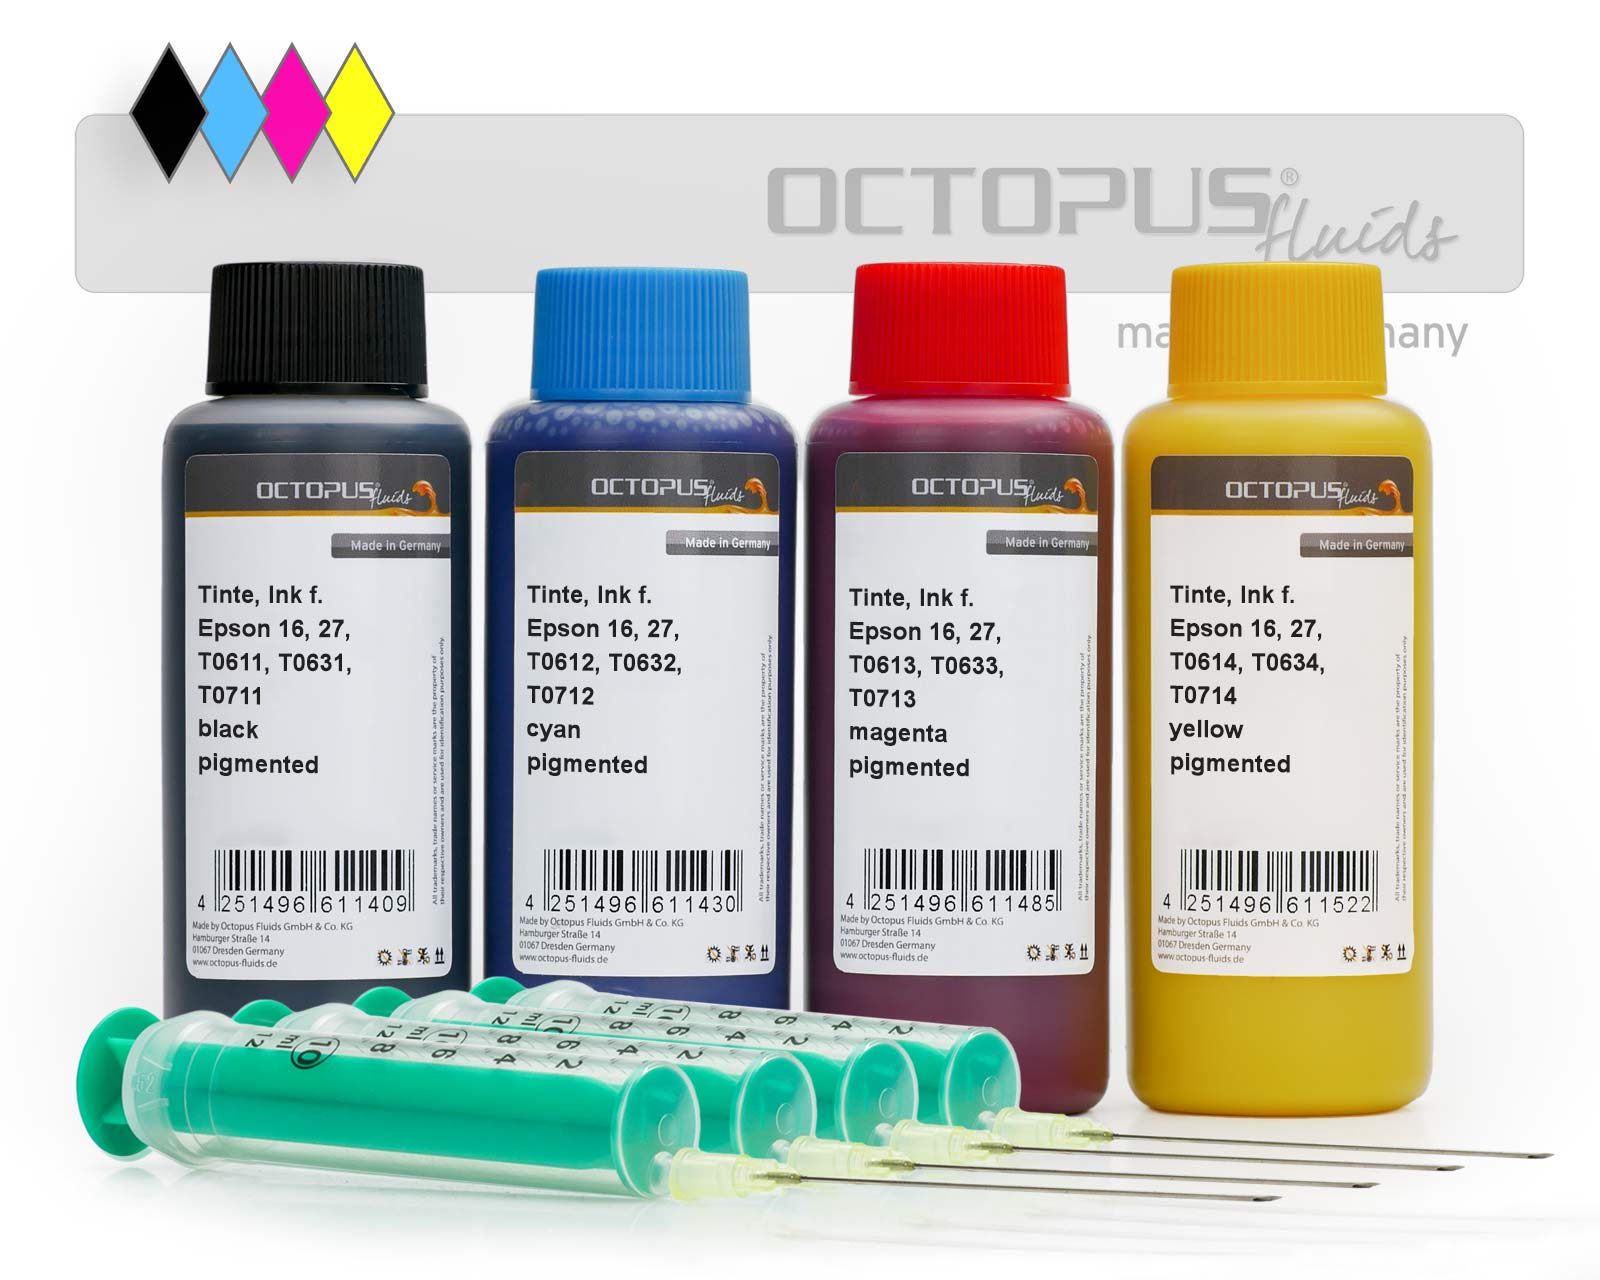 Refill ink set for Epson 16, 27, T061x, T063x, T071x cartridges, 4 colors